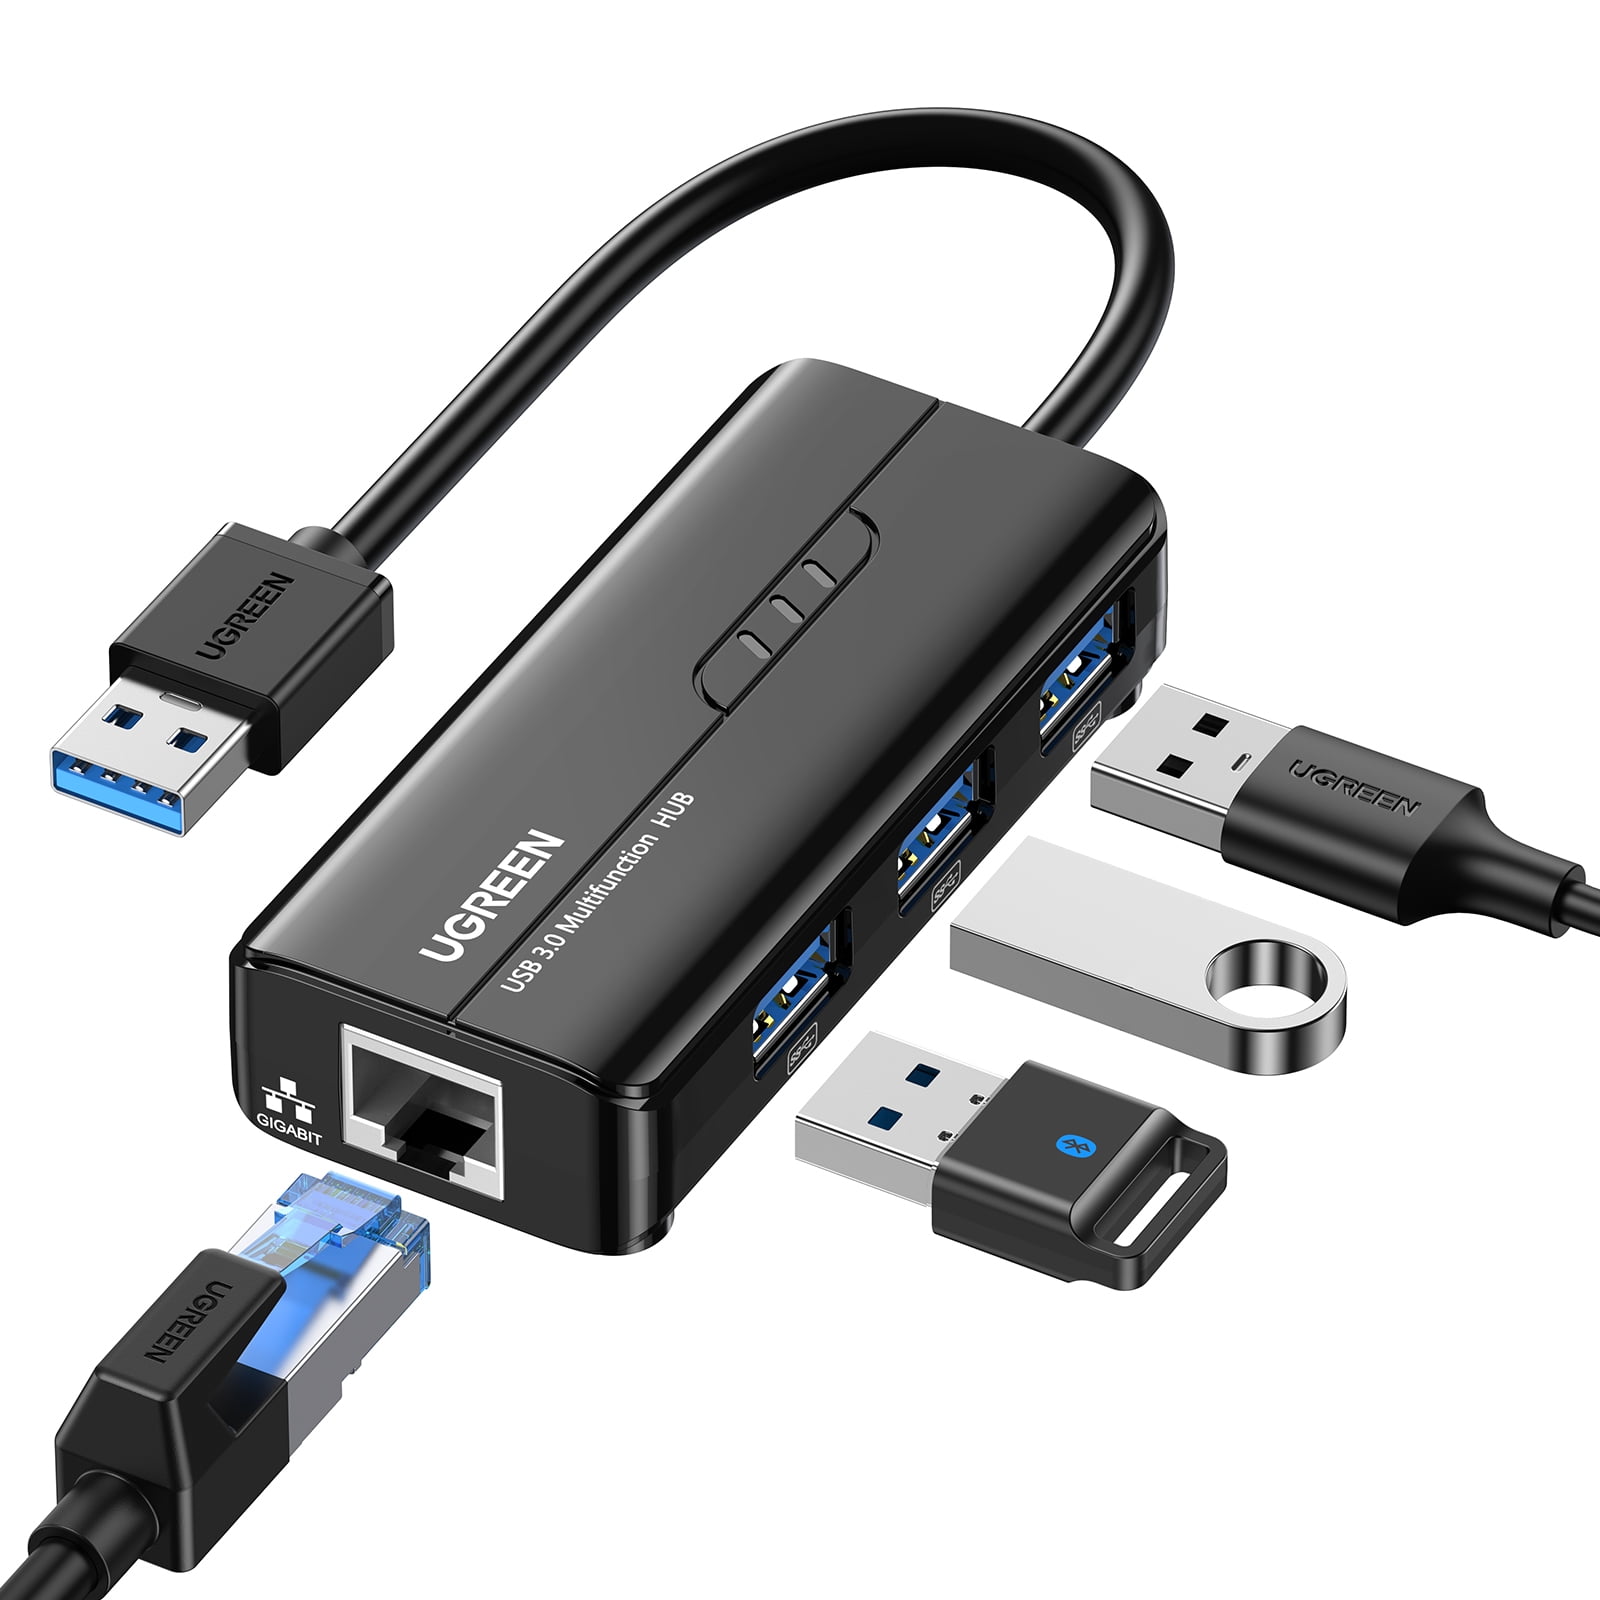 UGREEN USB to Ethernet Adapter, Gigabit Network Adapter with 3 USB